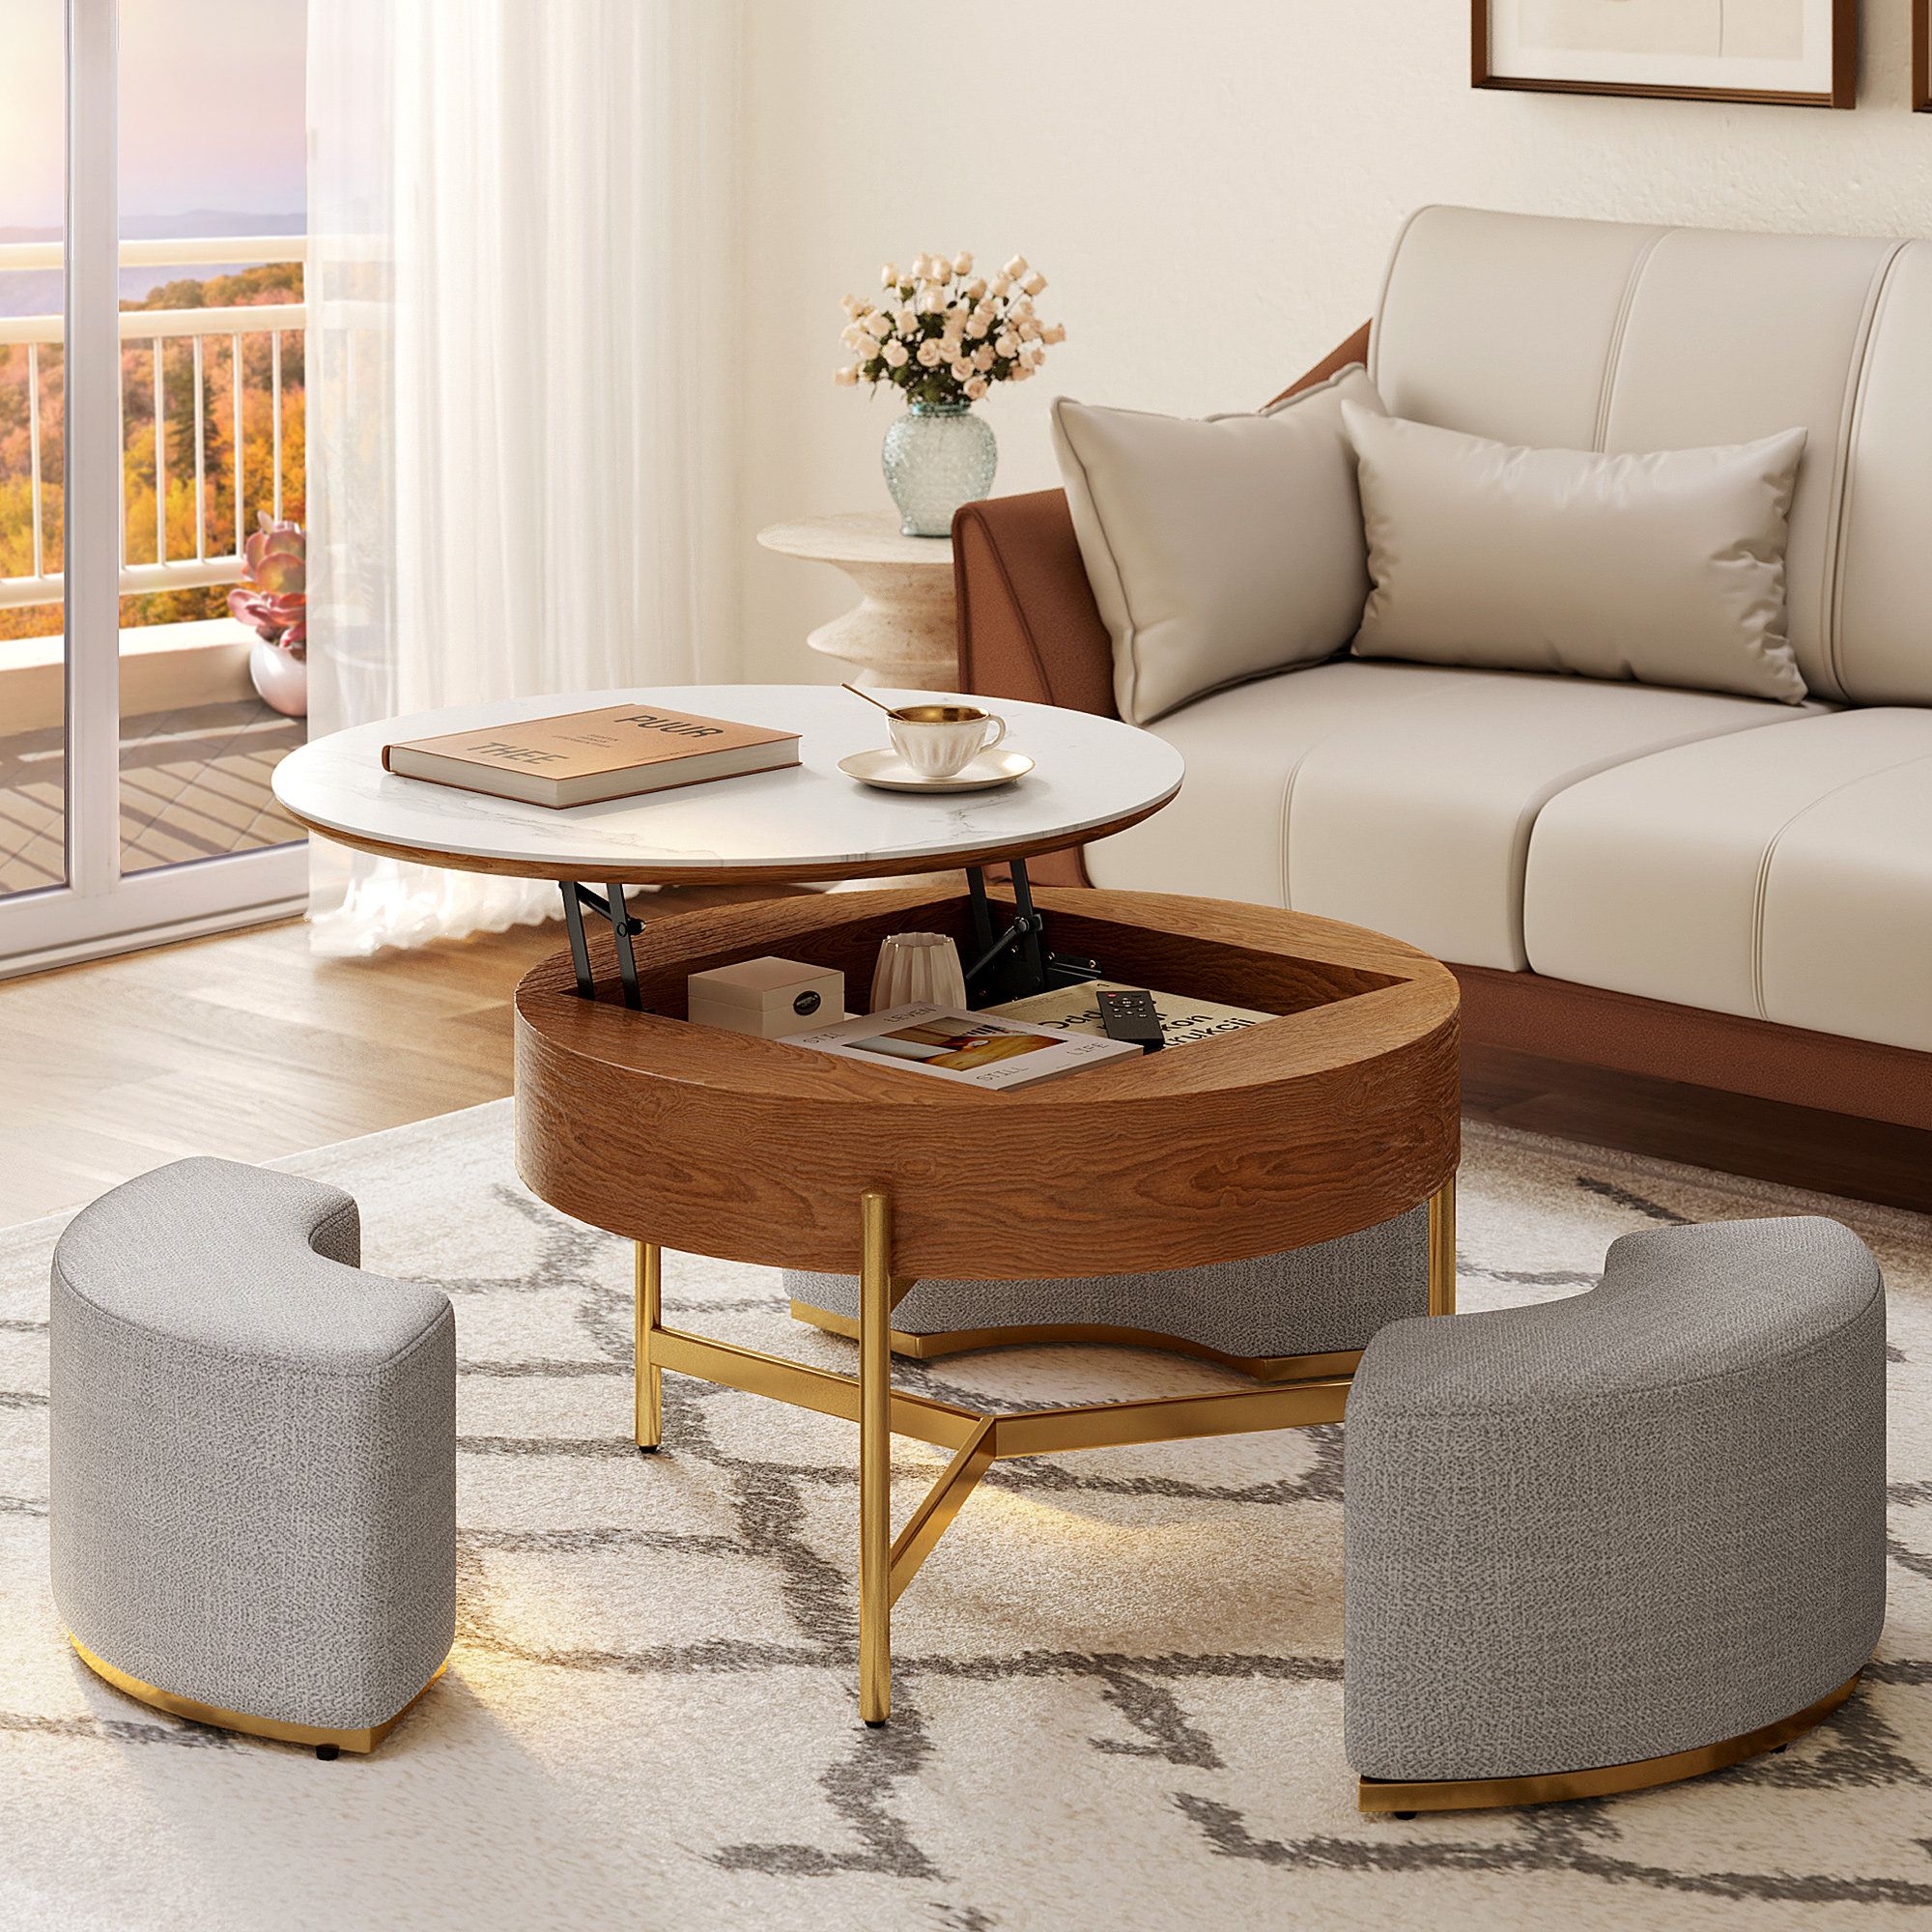 Everly Quinn Sohad Lift Top Extendable Frame Coffee Table With Storage &  Reviews | Wayfair With Regard To Lift Top Coffee Tables With Storage (Photo 1 of 15)